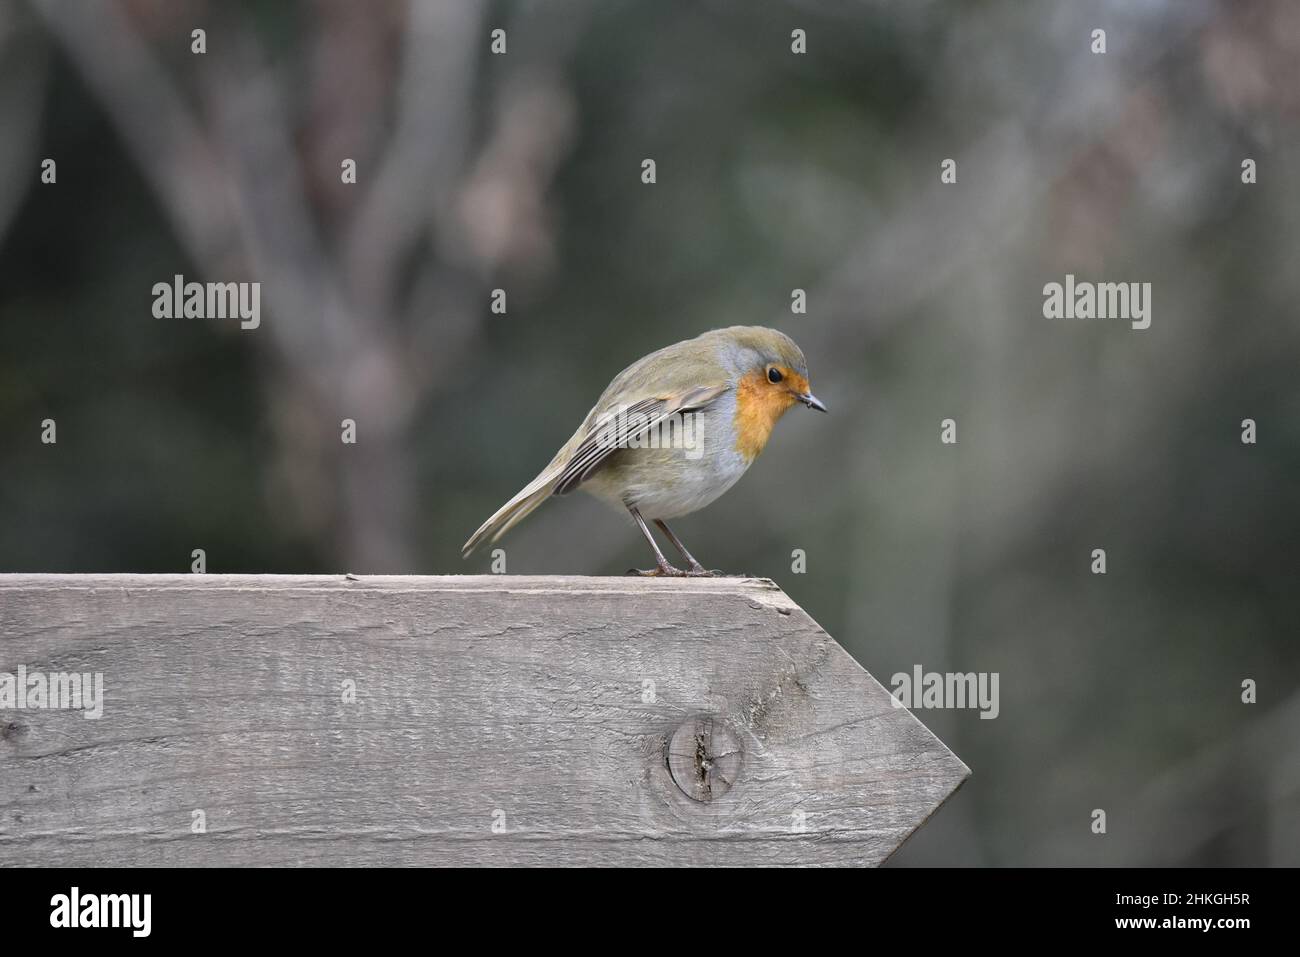 Image of a European Robin (Erithacus rubecula) Looking Down from a Horizontal Wooden Arrow Pointing to Right of Shot Against a Blurred Tree Background Stock Photo